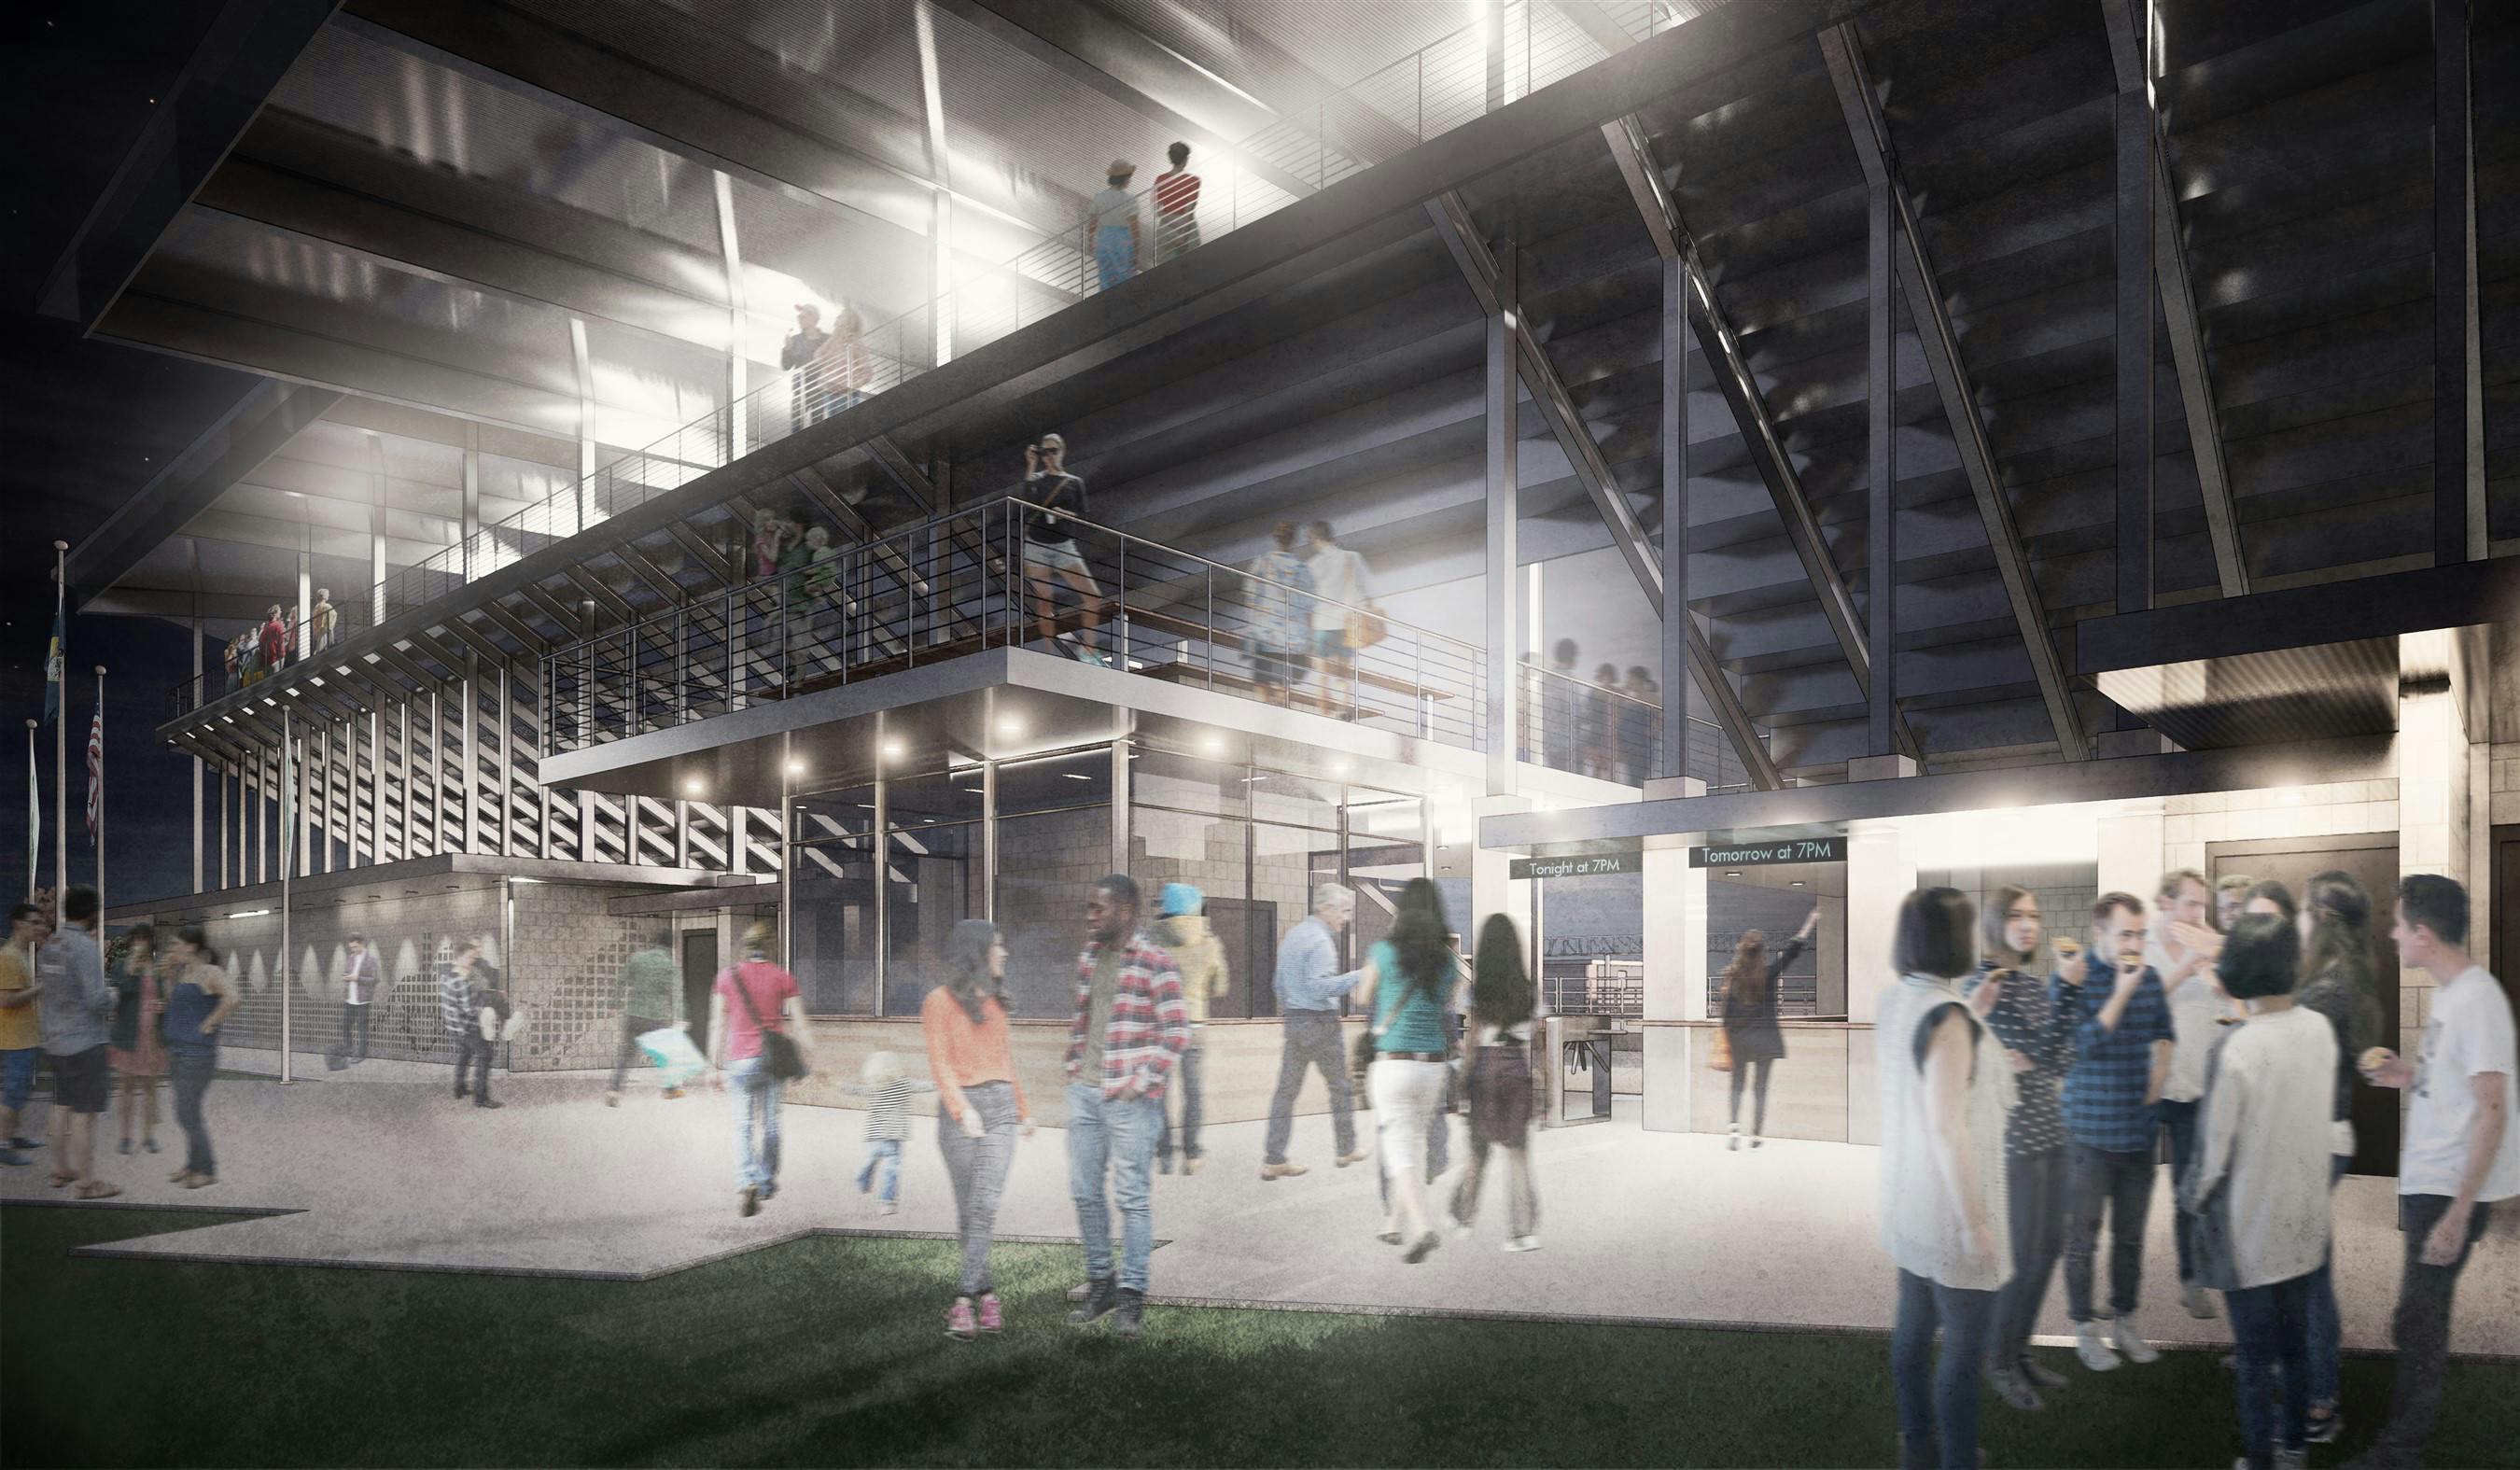 A rendering of the rodeo entryway behind the grandstands.